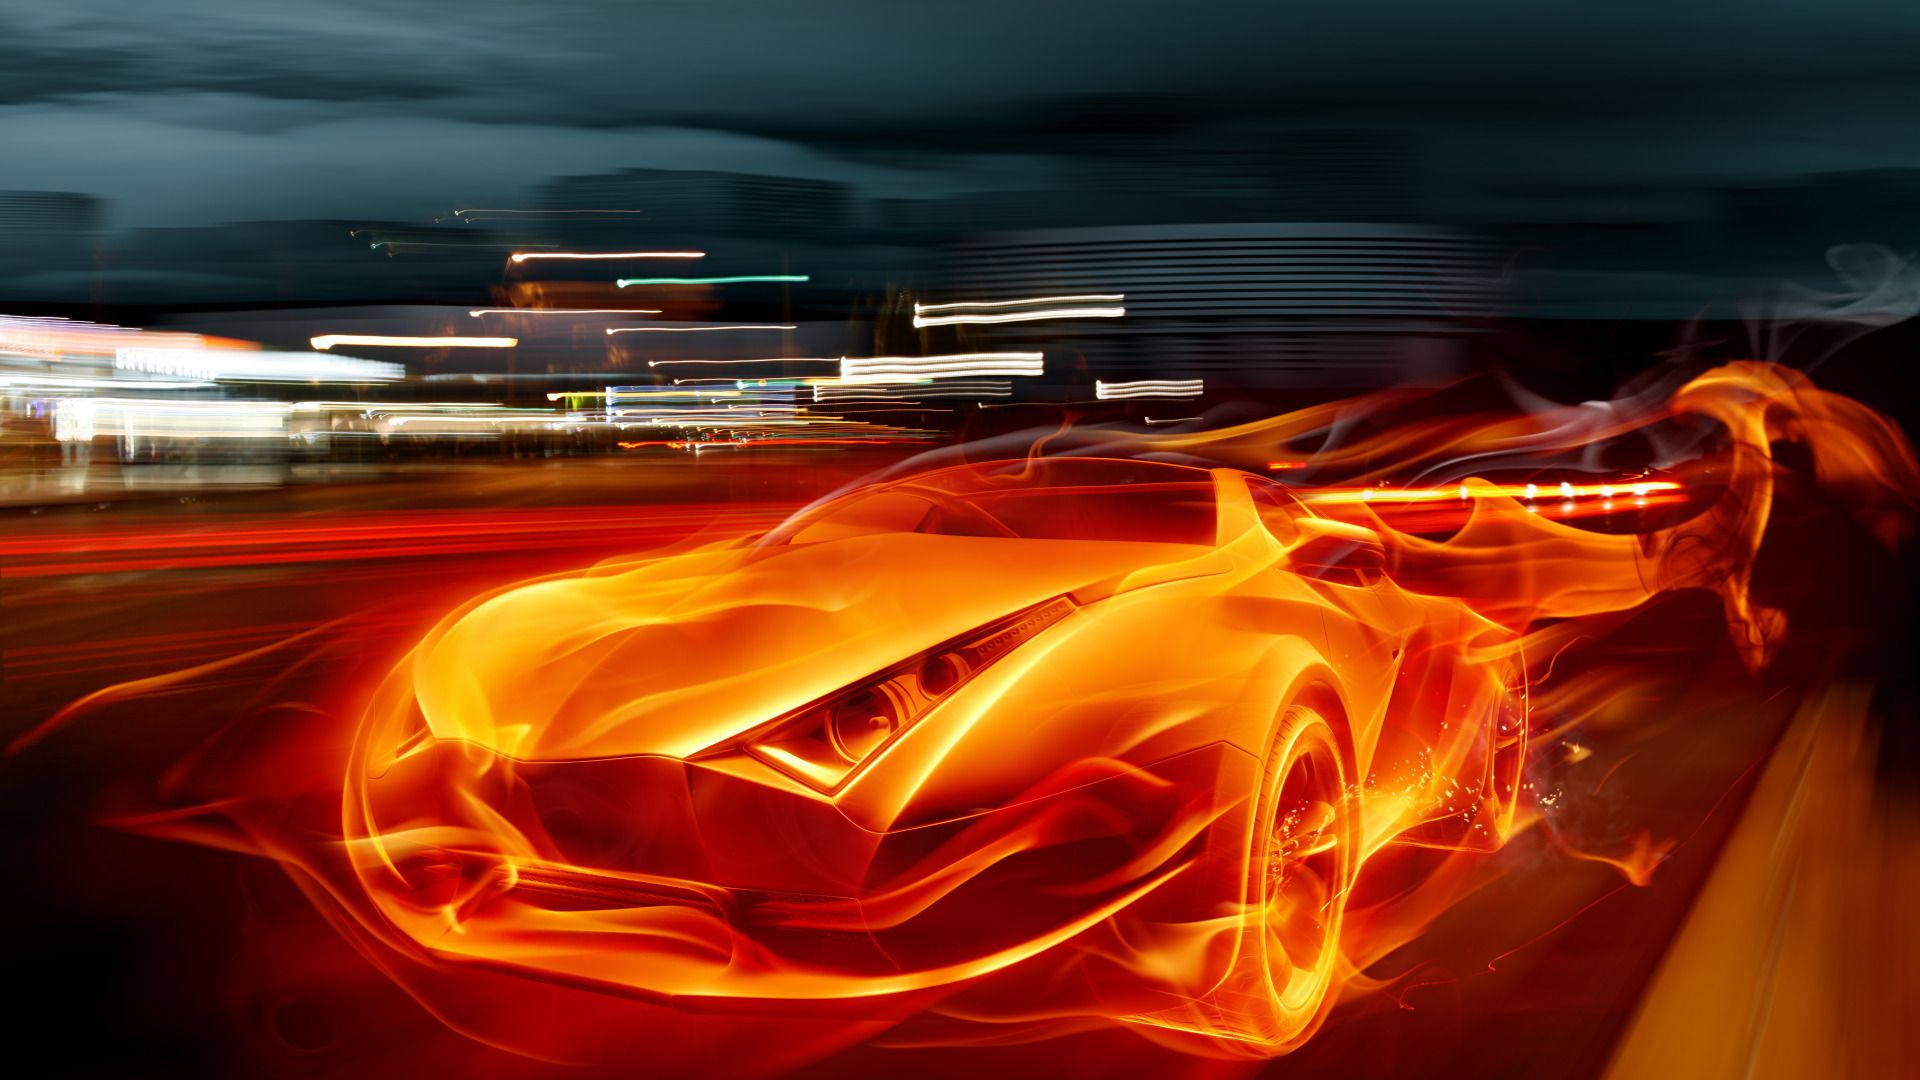 The Flames On Car Photo, Fire Engine Abstraction 